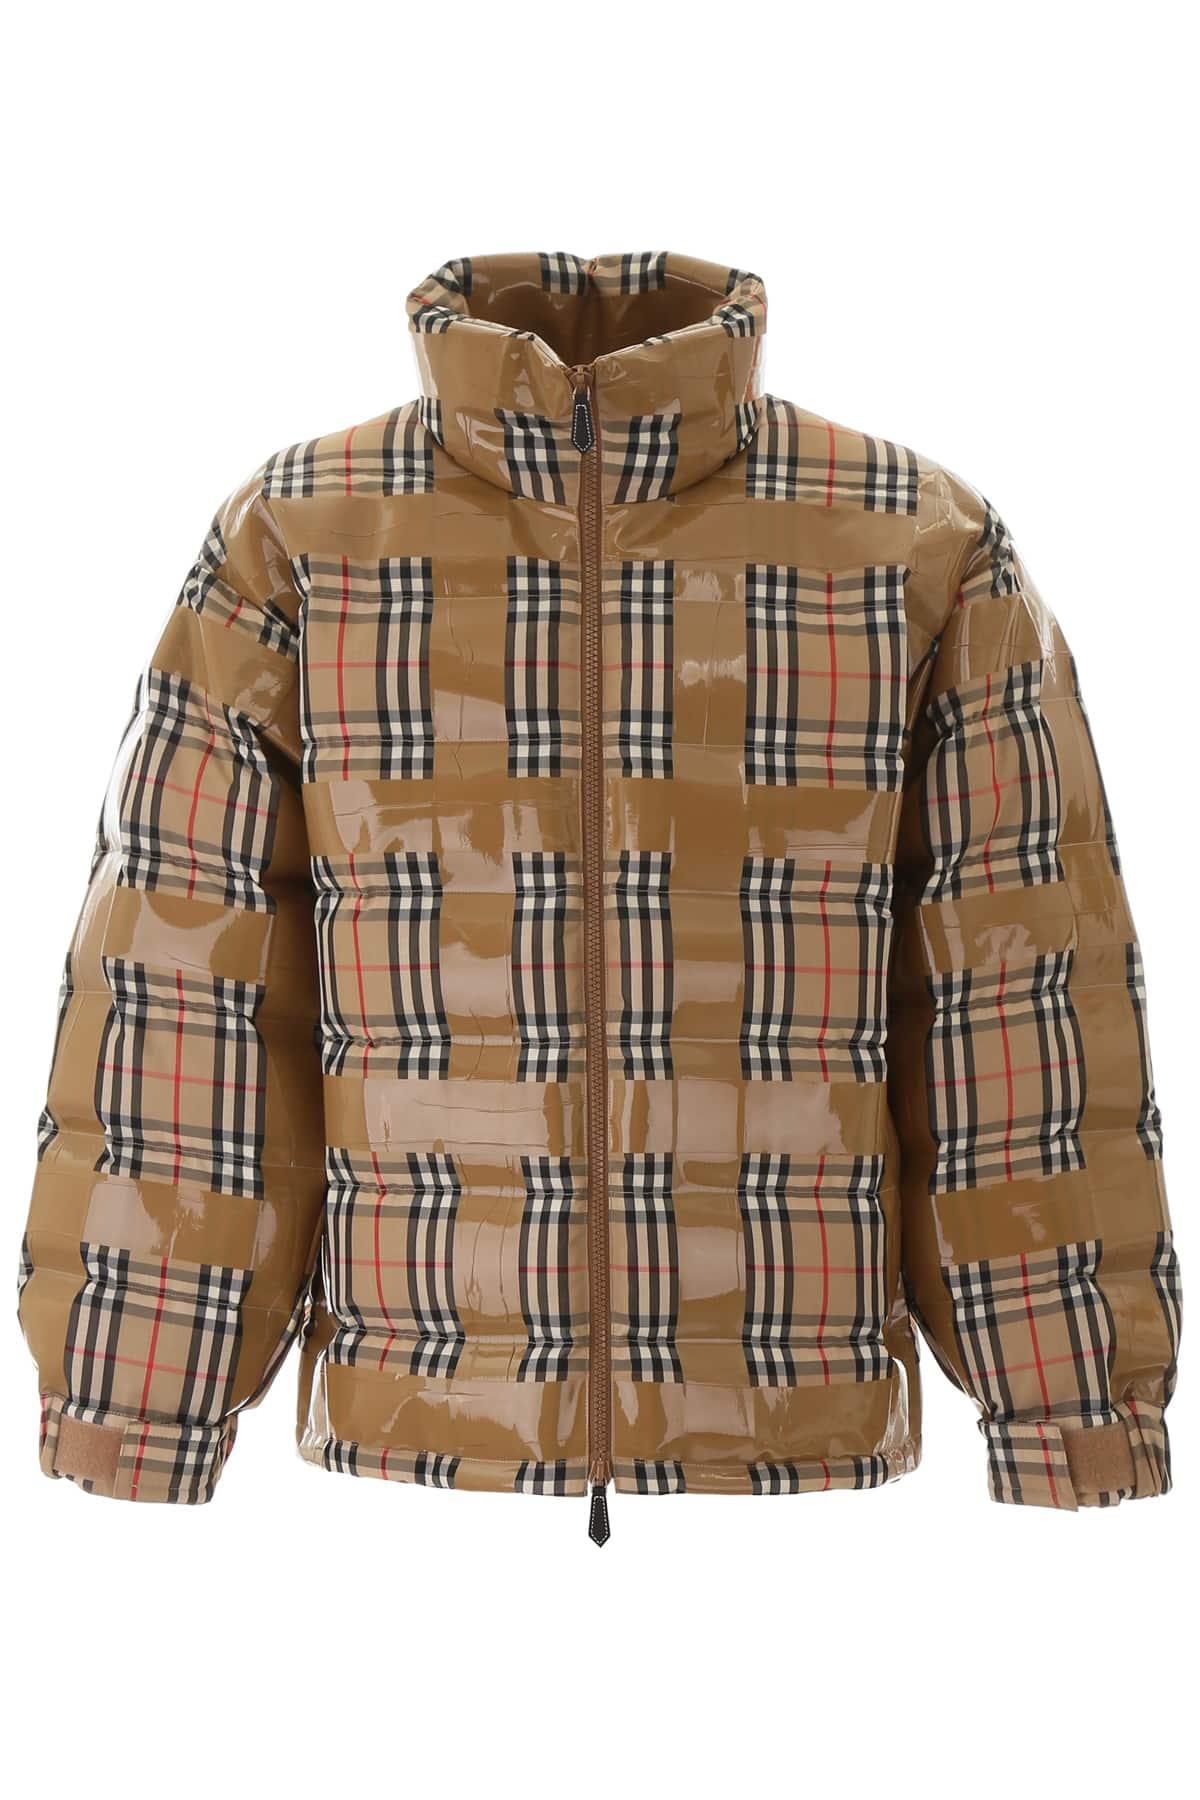 Burberry Tape Vintage Check Jacket in Natural for Men | Lyst